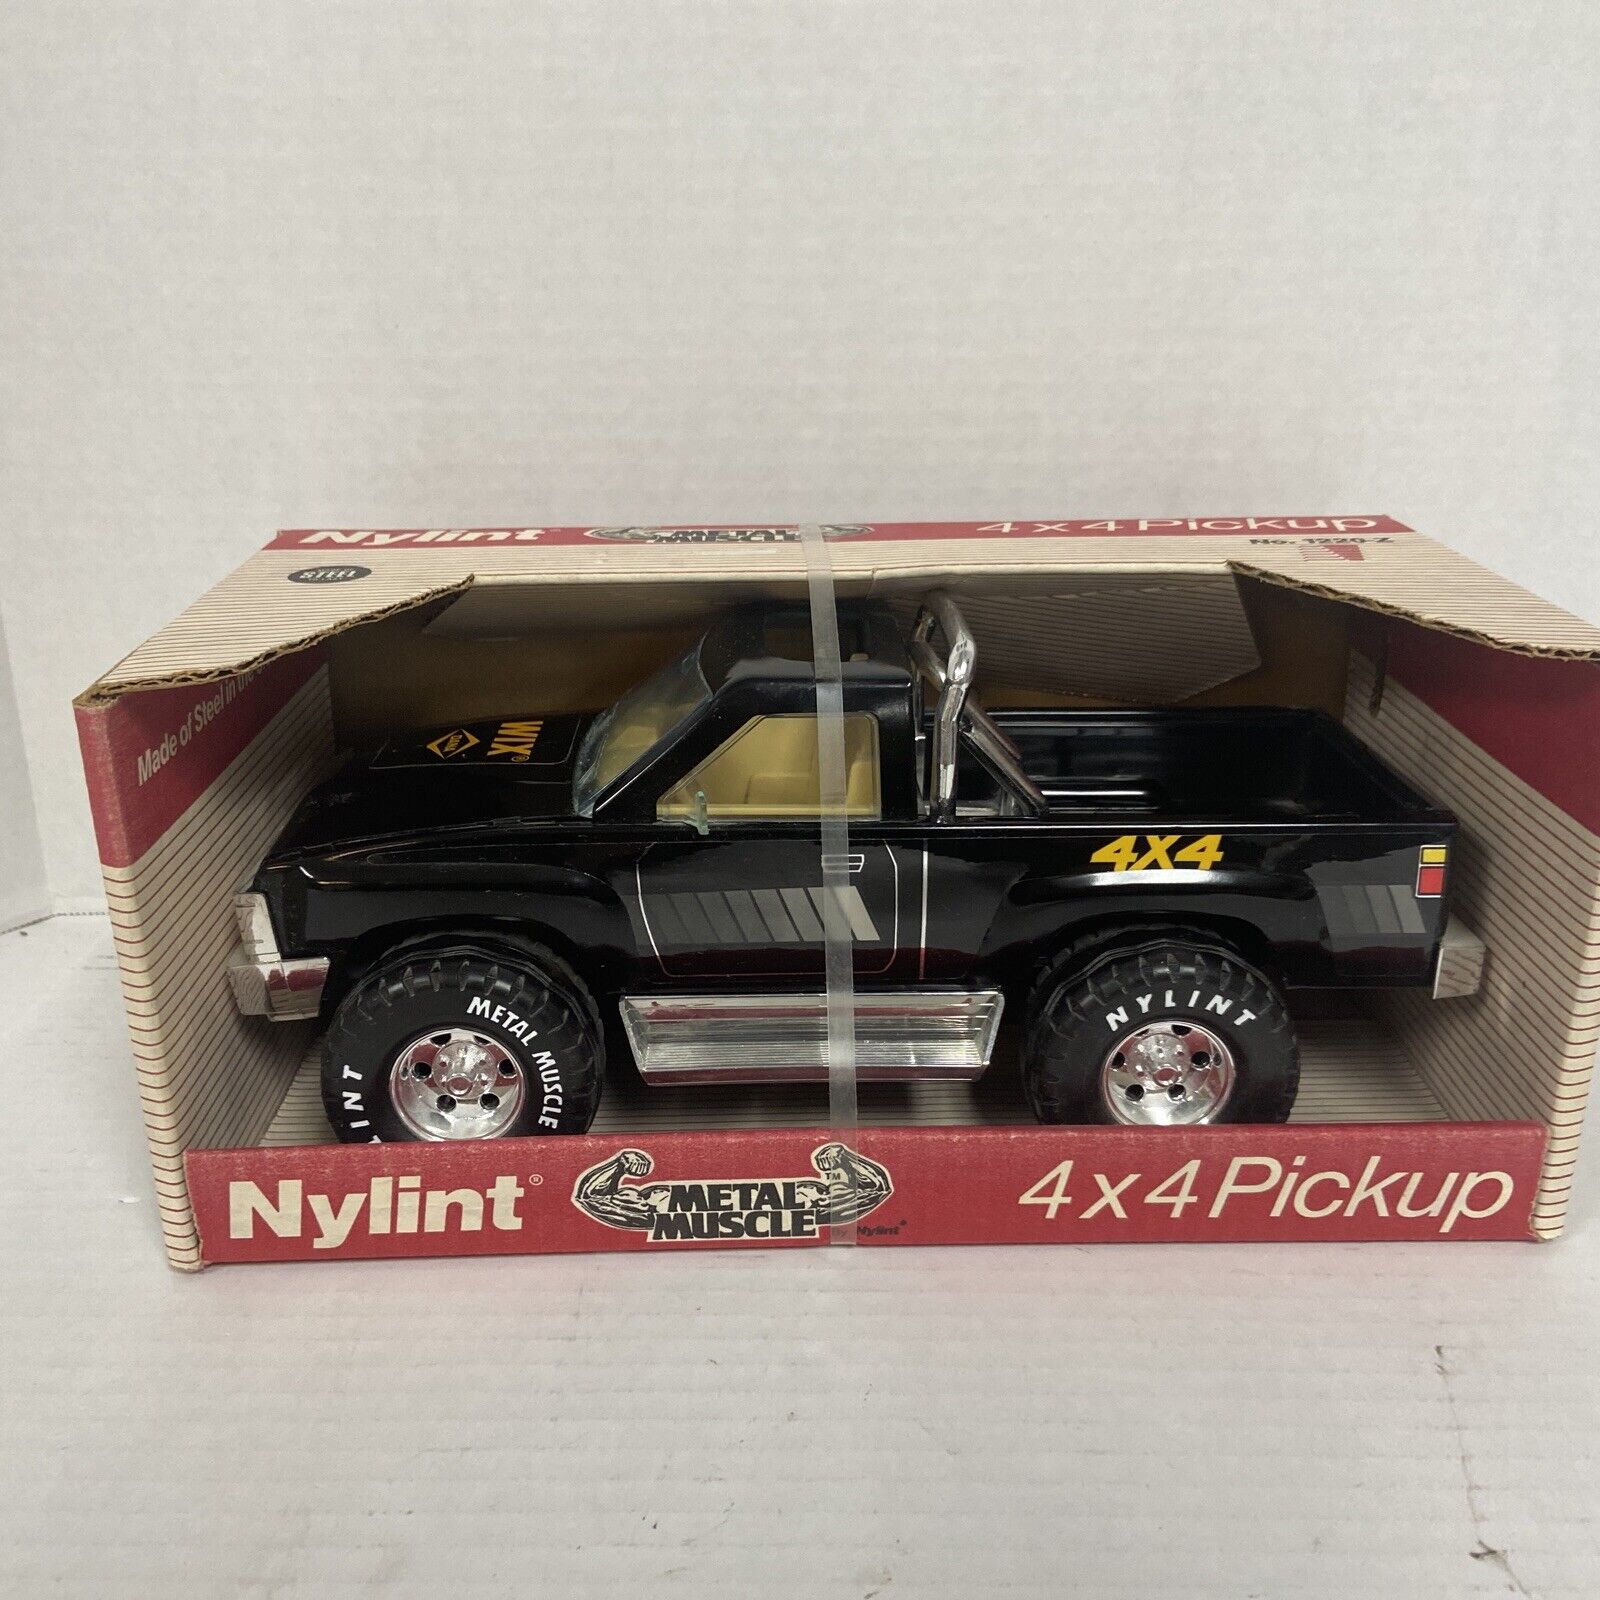 Nylint 4x4 Pickup No. 1220-Z Wix Filters new in box-very nice